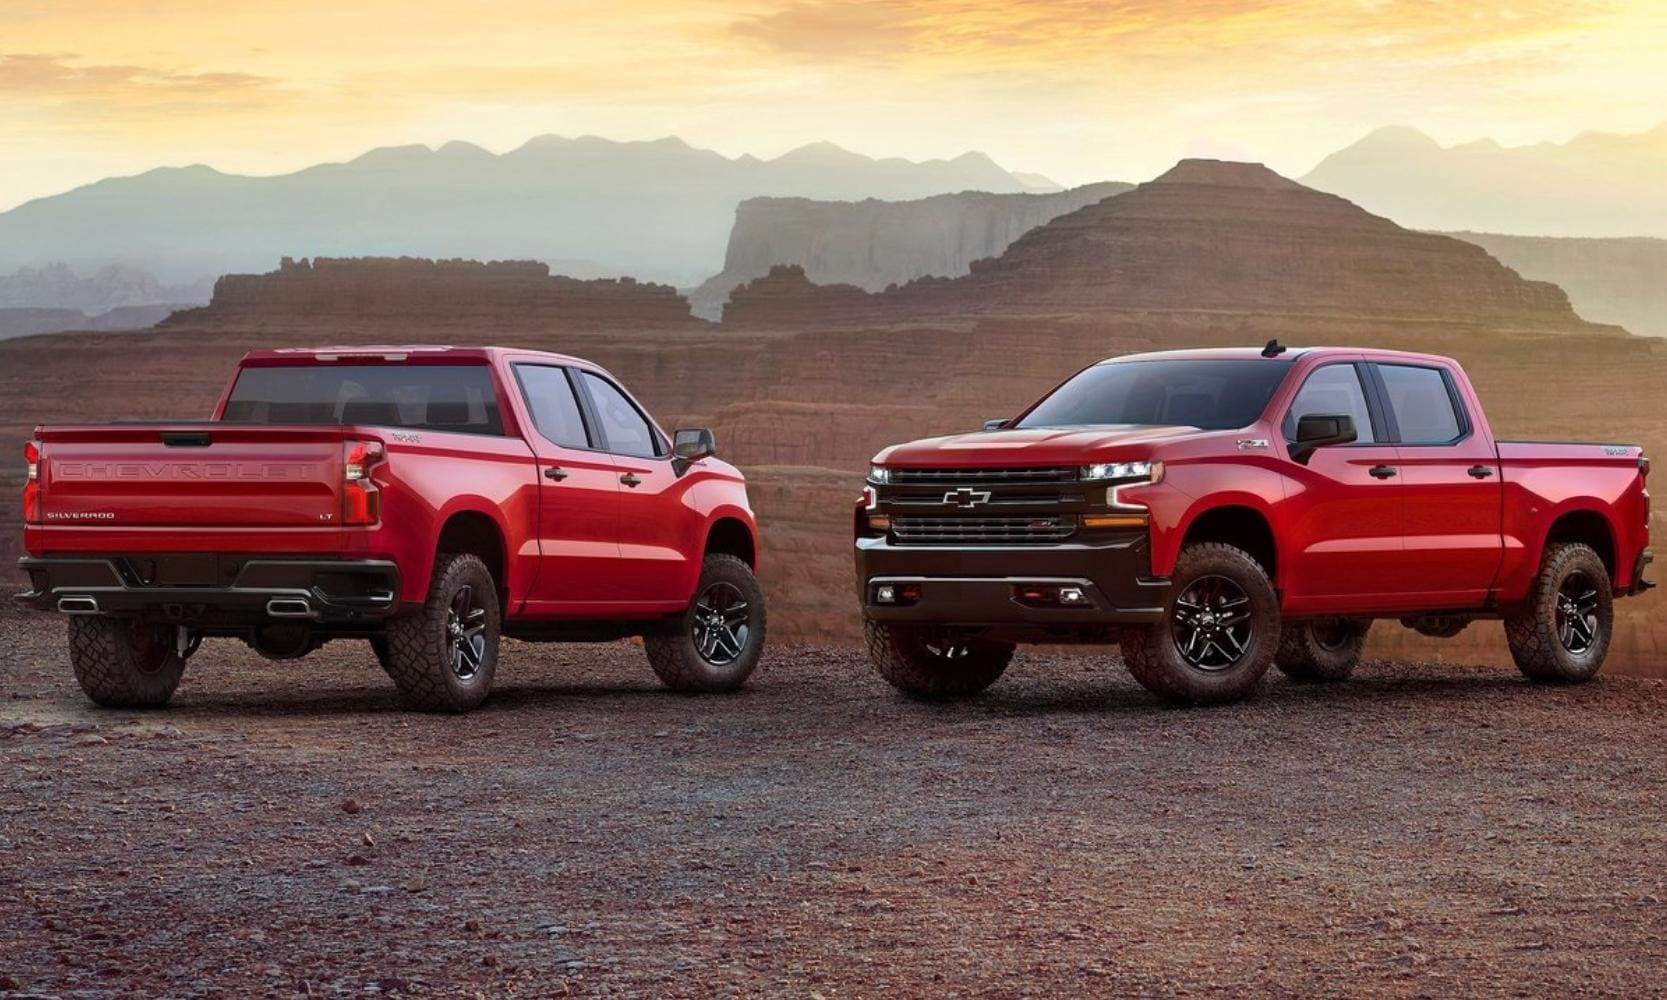 Two red Chevrolet Silverado 1500 trucks parked side by side on a desert cliff